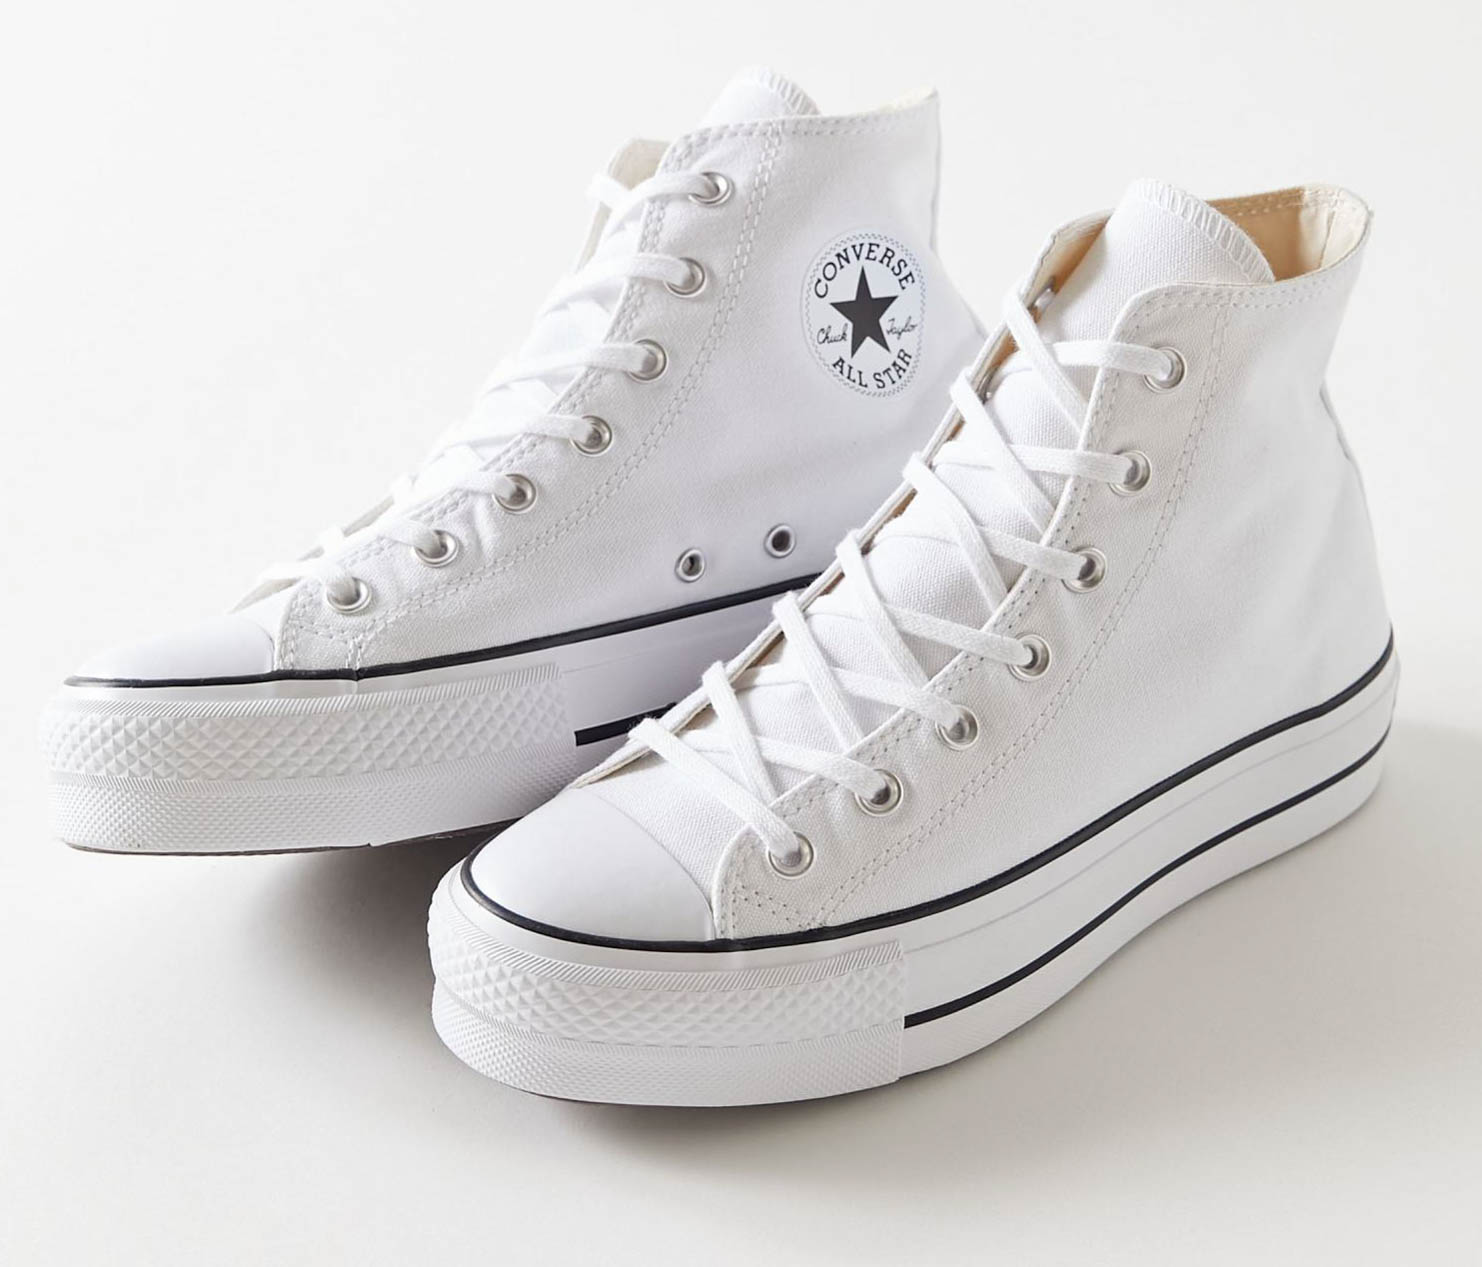 UrbanOutfitters Converse High Top Platform Sneakers